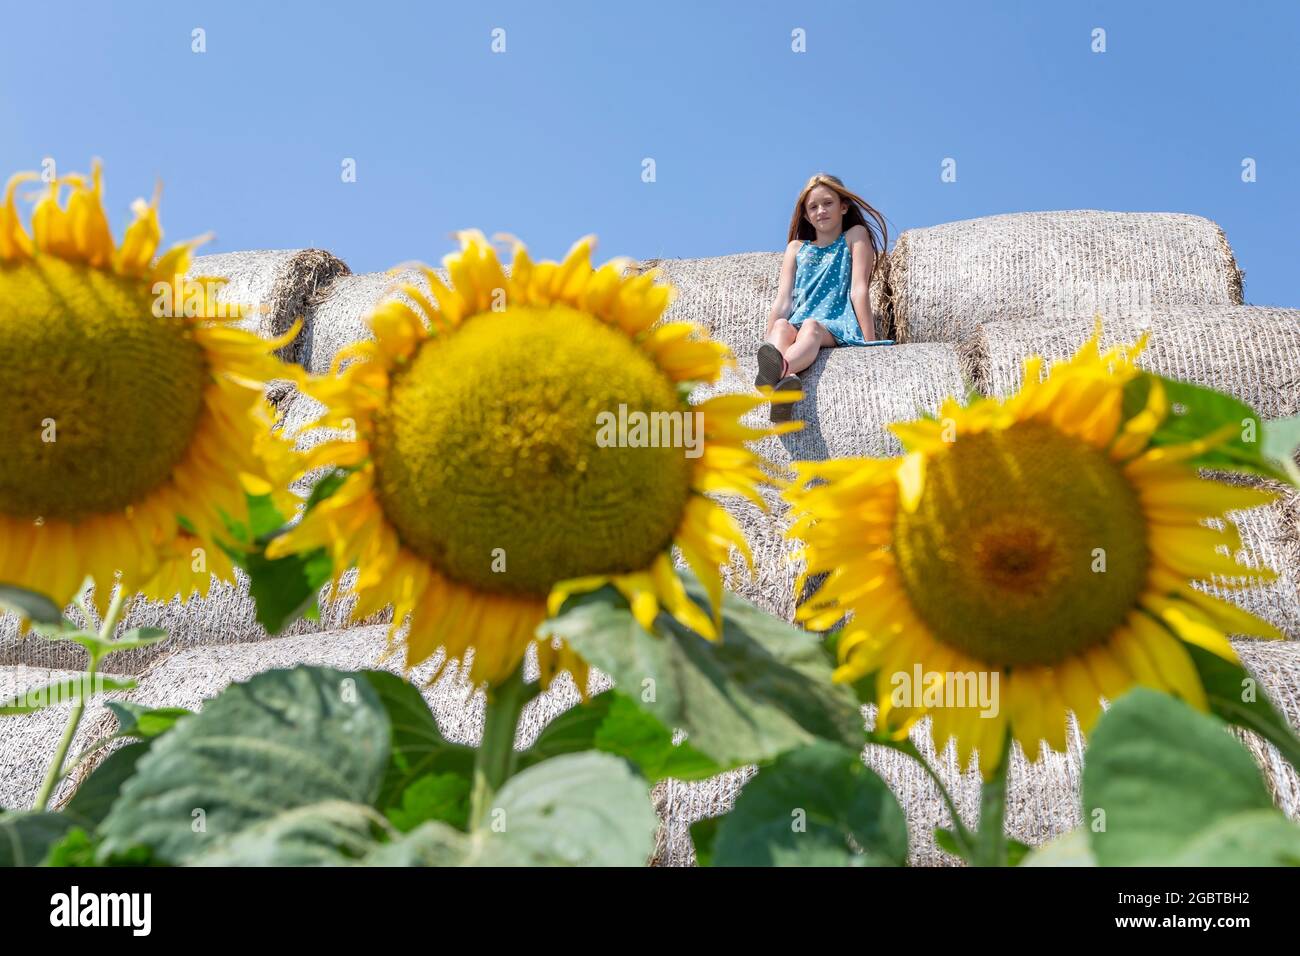 Girl sitting on top of the hay bale with sunflowers on the foreground. Generation Z. Stock Photo